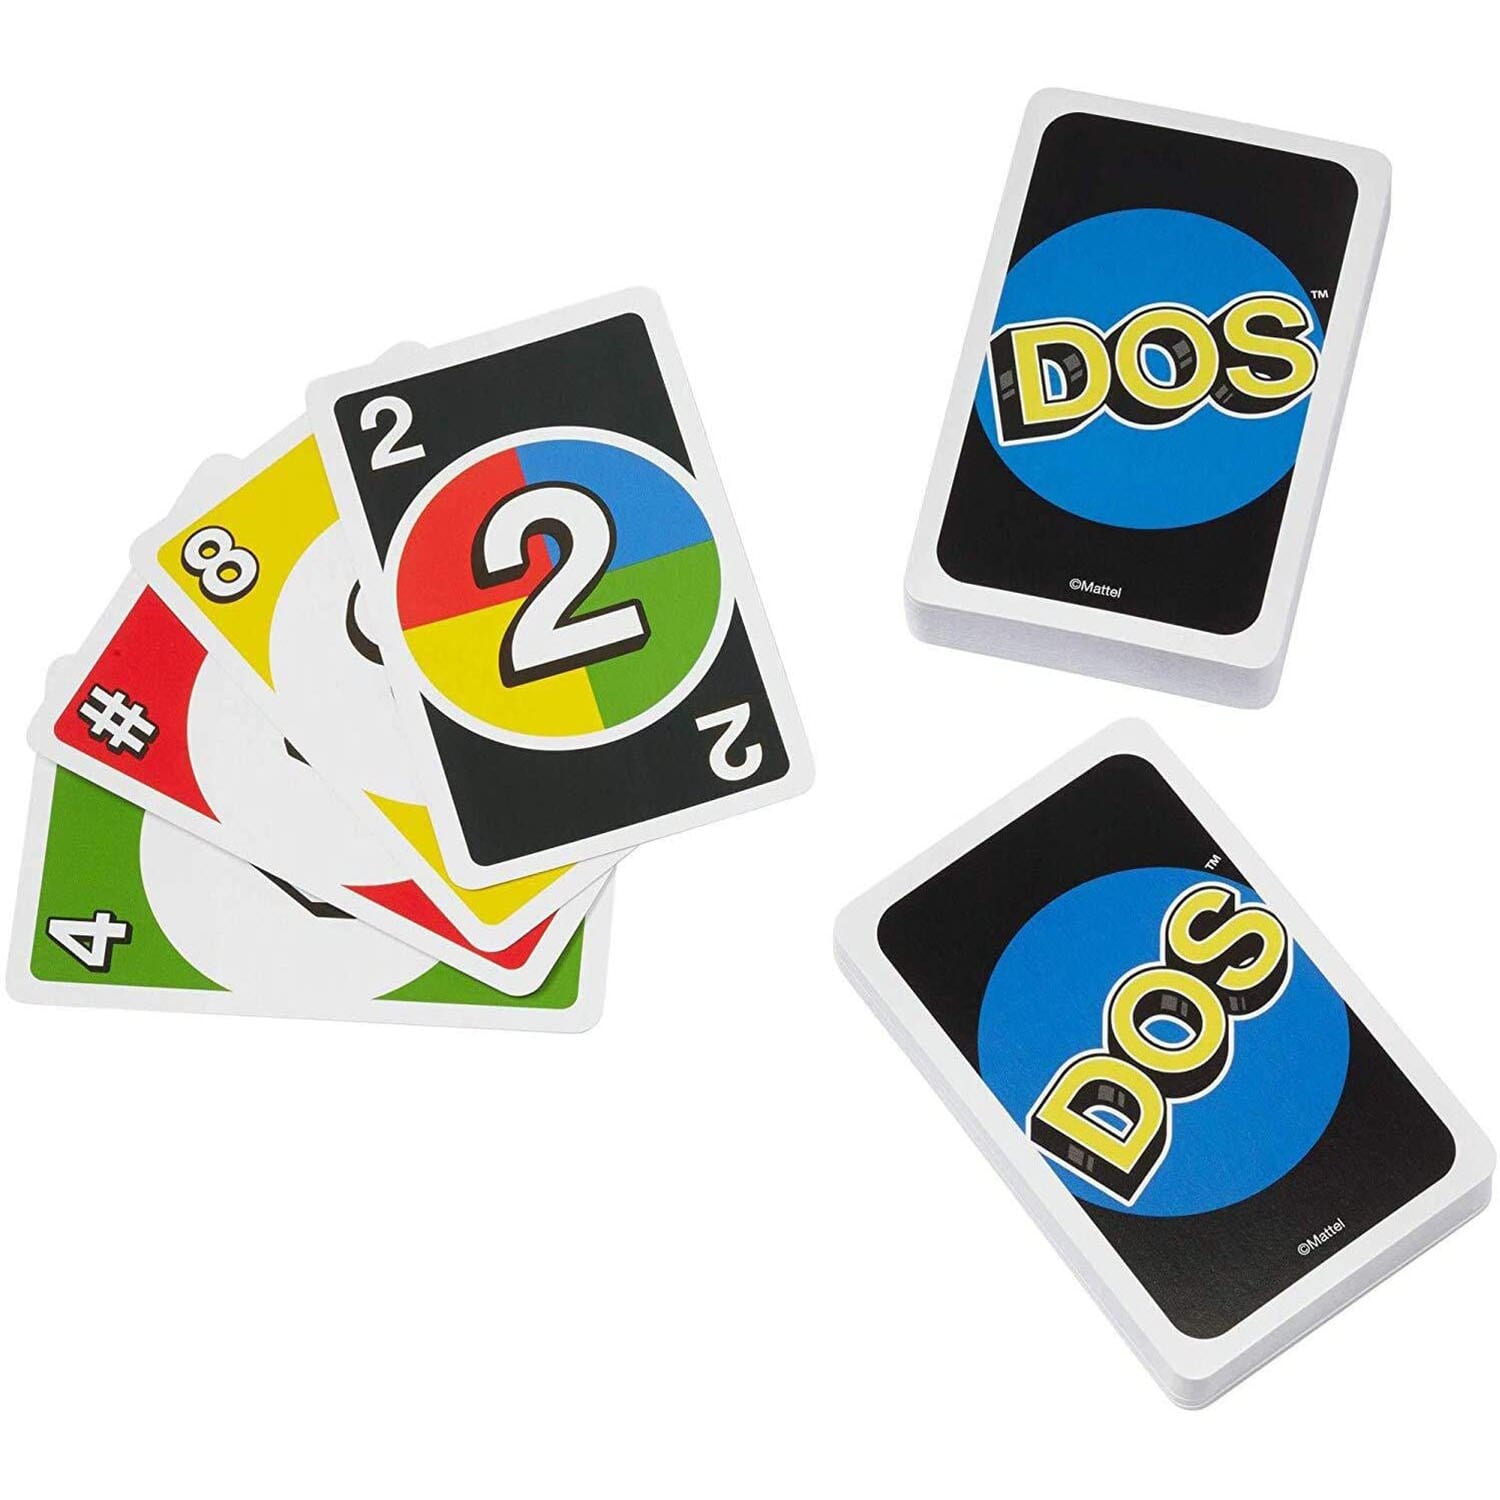 DOS-From the Makers of UNO